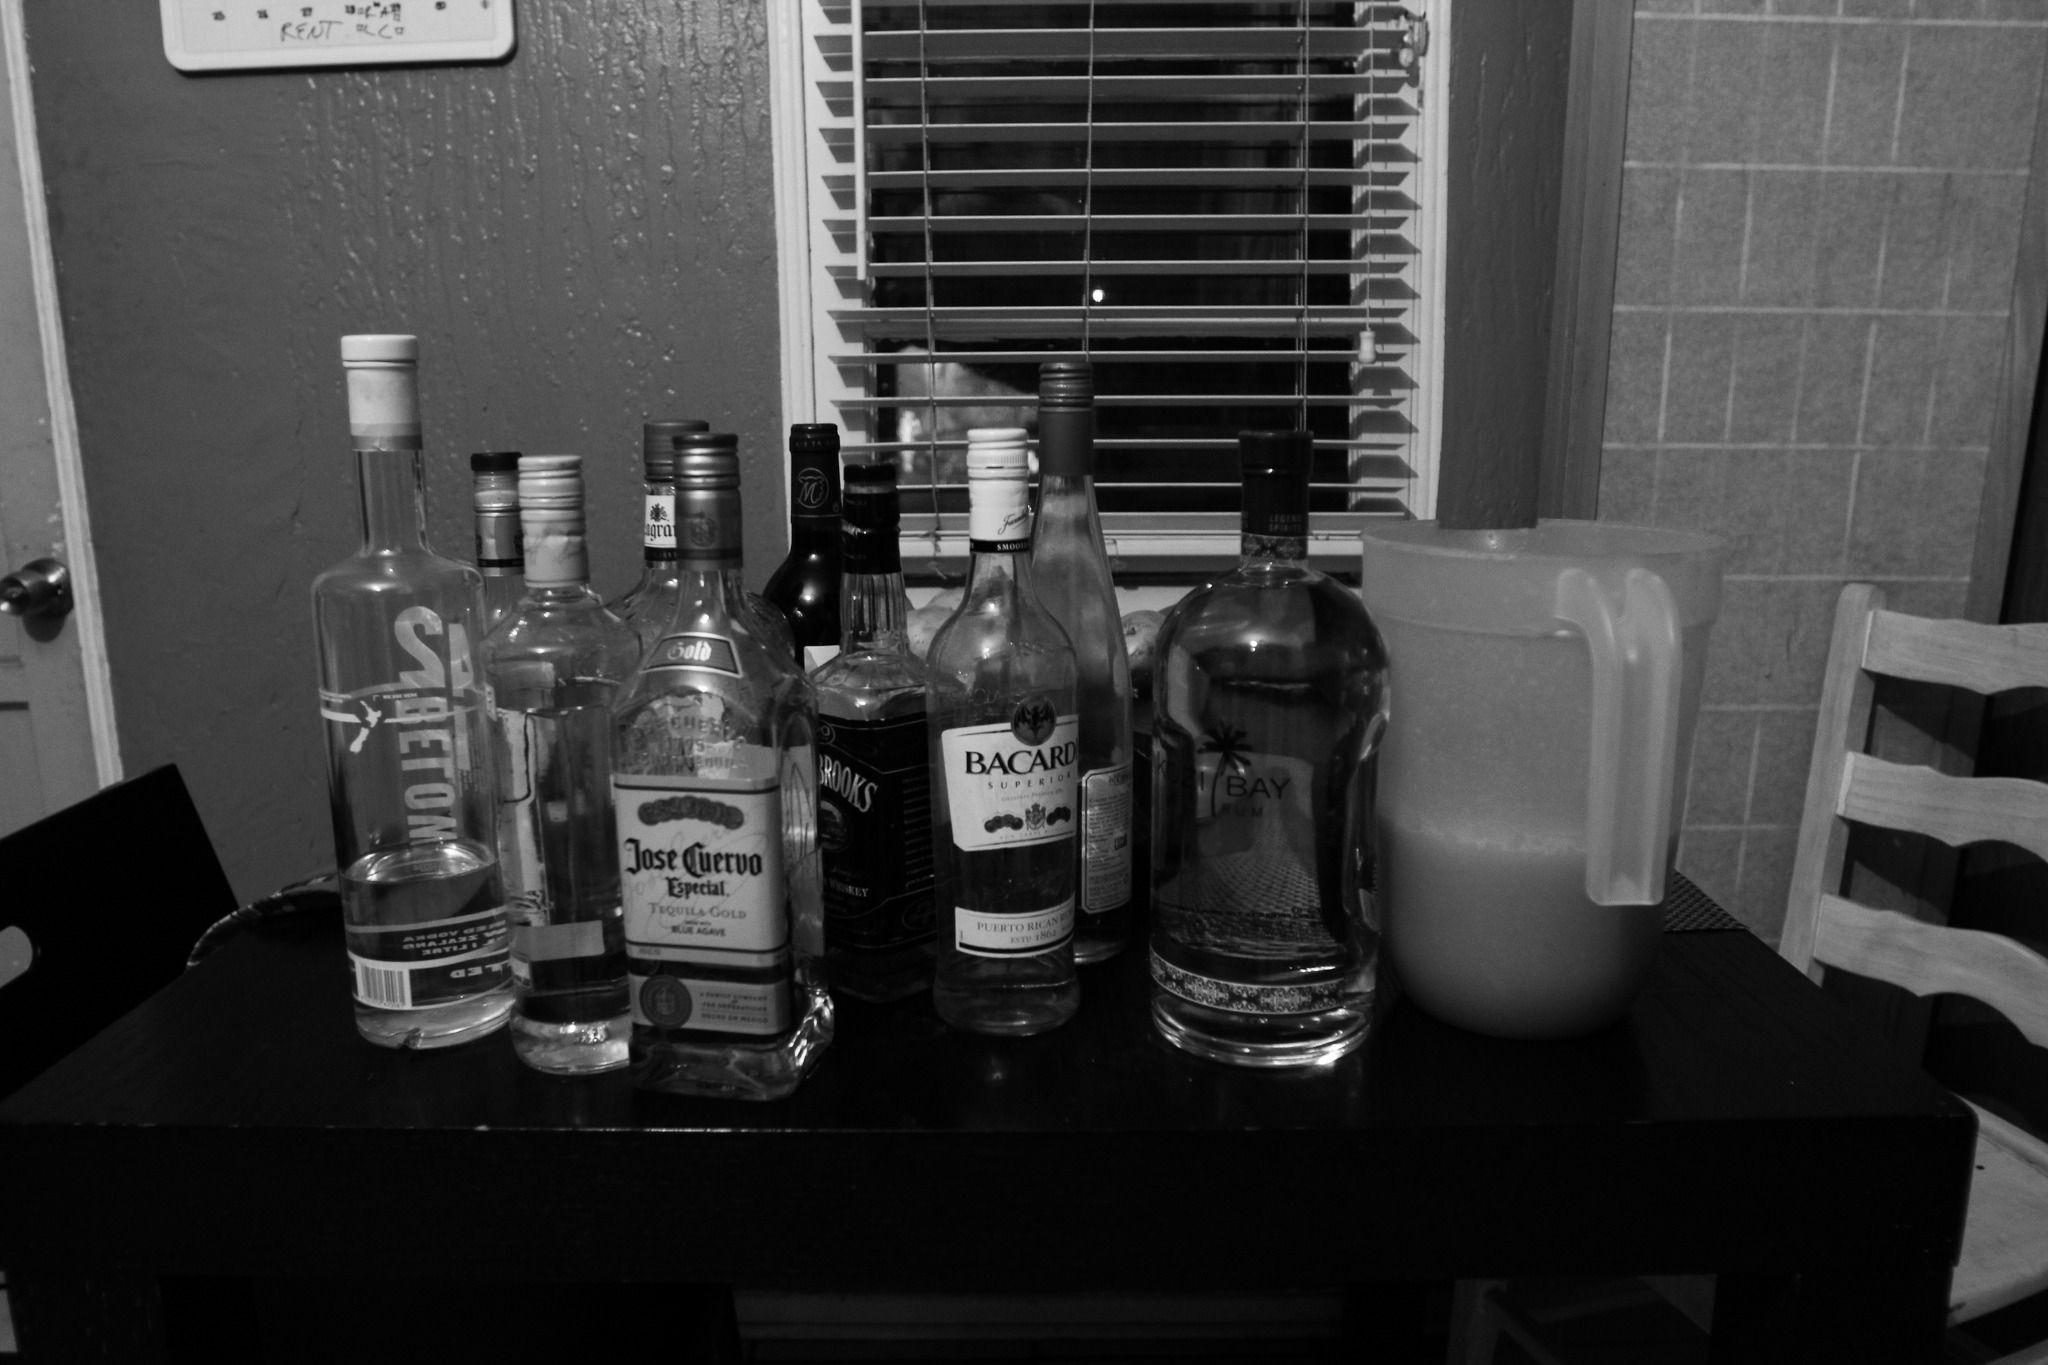 This is a grayscale dark photo of a small table with various bottles of alcohol. There is Jose Cuervo, Bacardi, 42 Below, and Jack Daniel's visible.